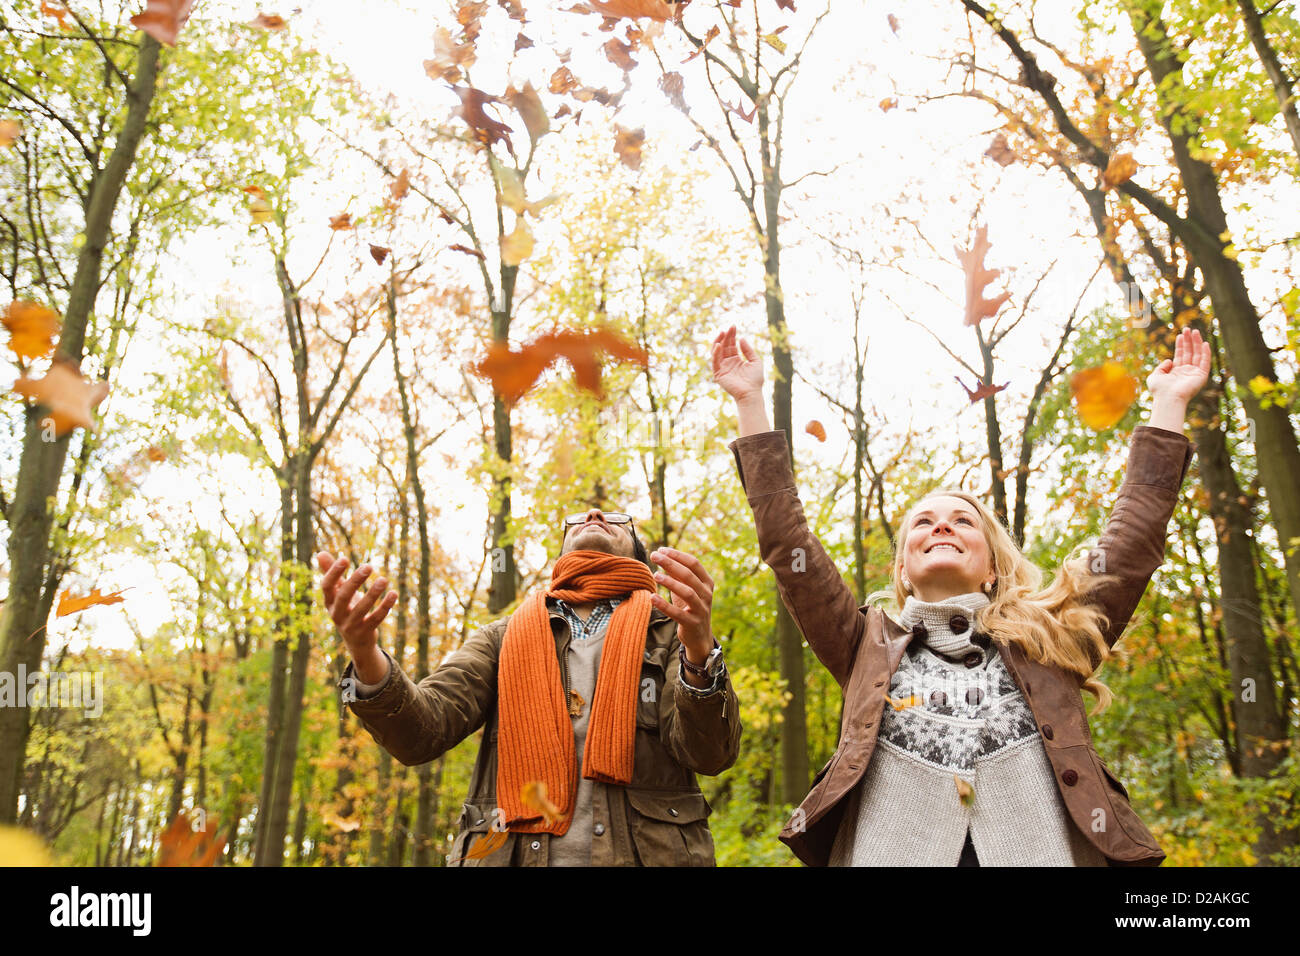 Smiling couple playing in autumn leaves Stock Photo